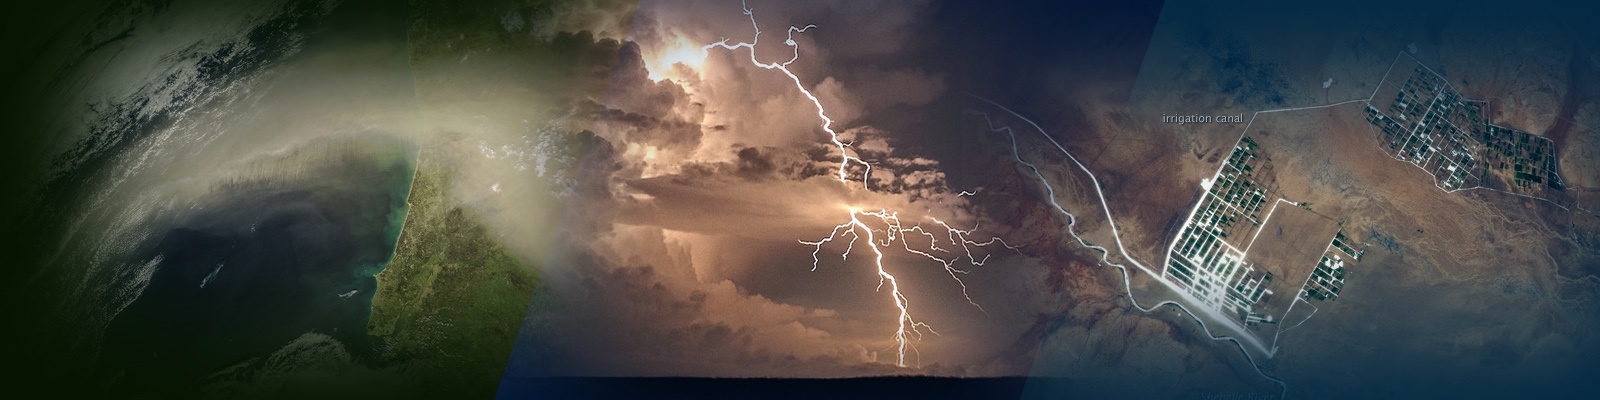 Banner image of dust, lightening and irrigation